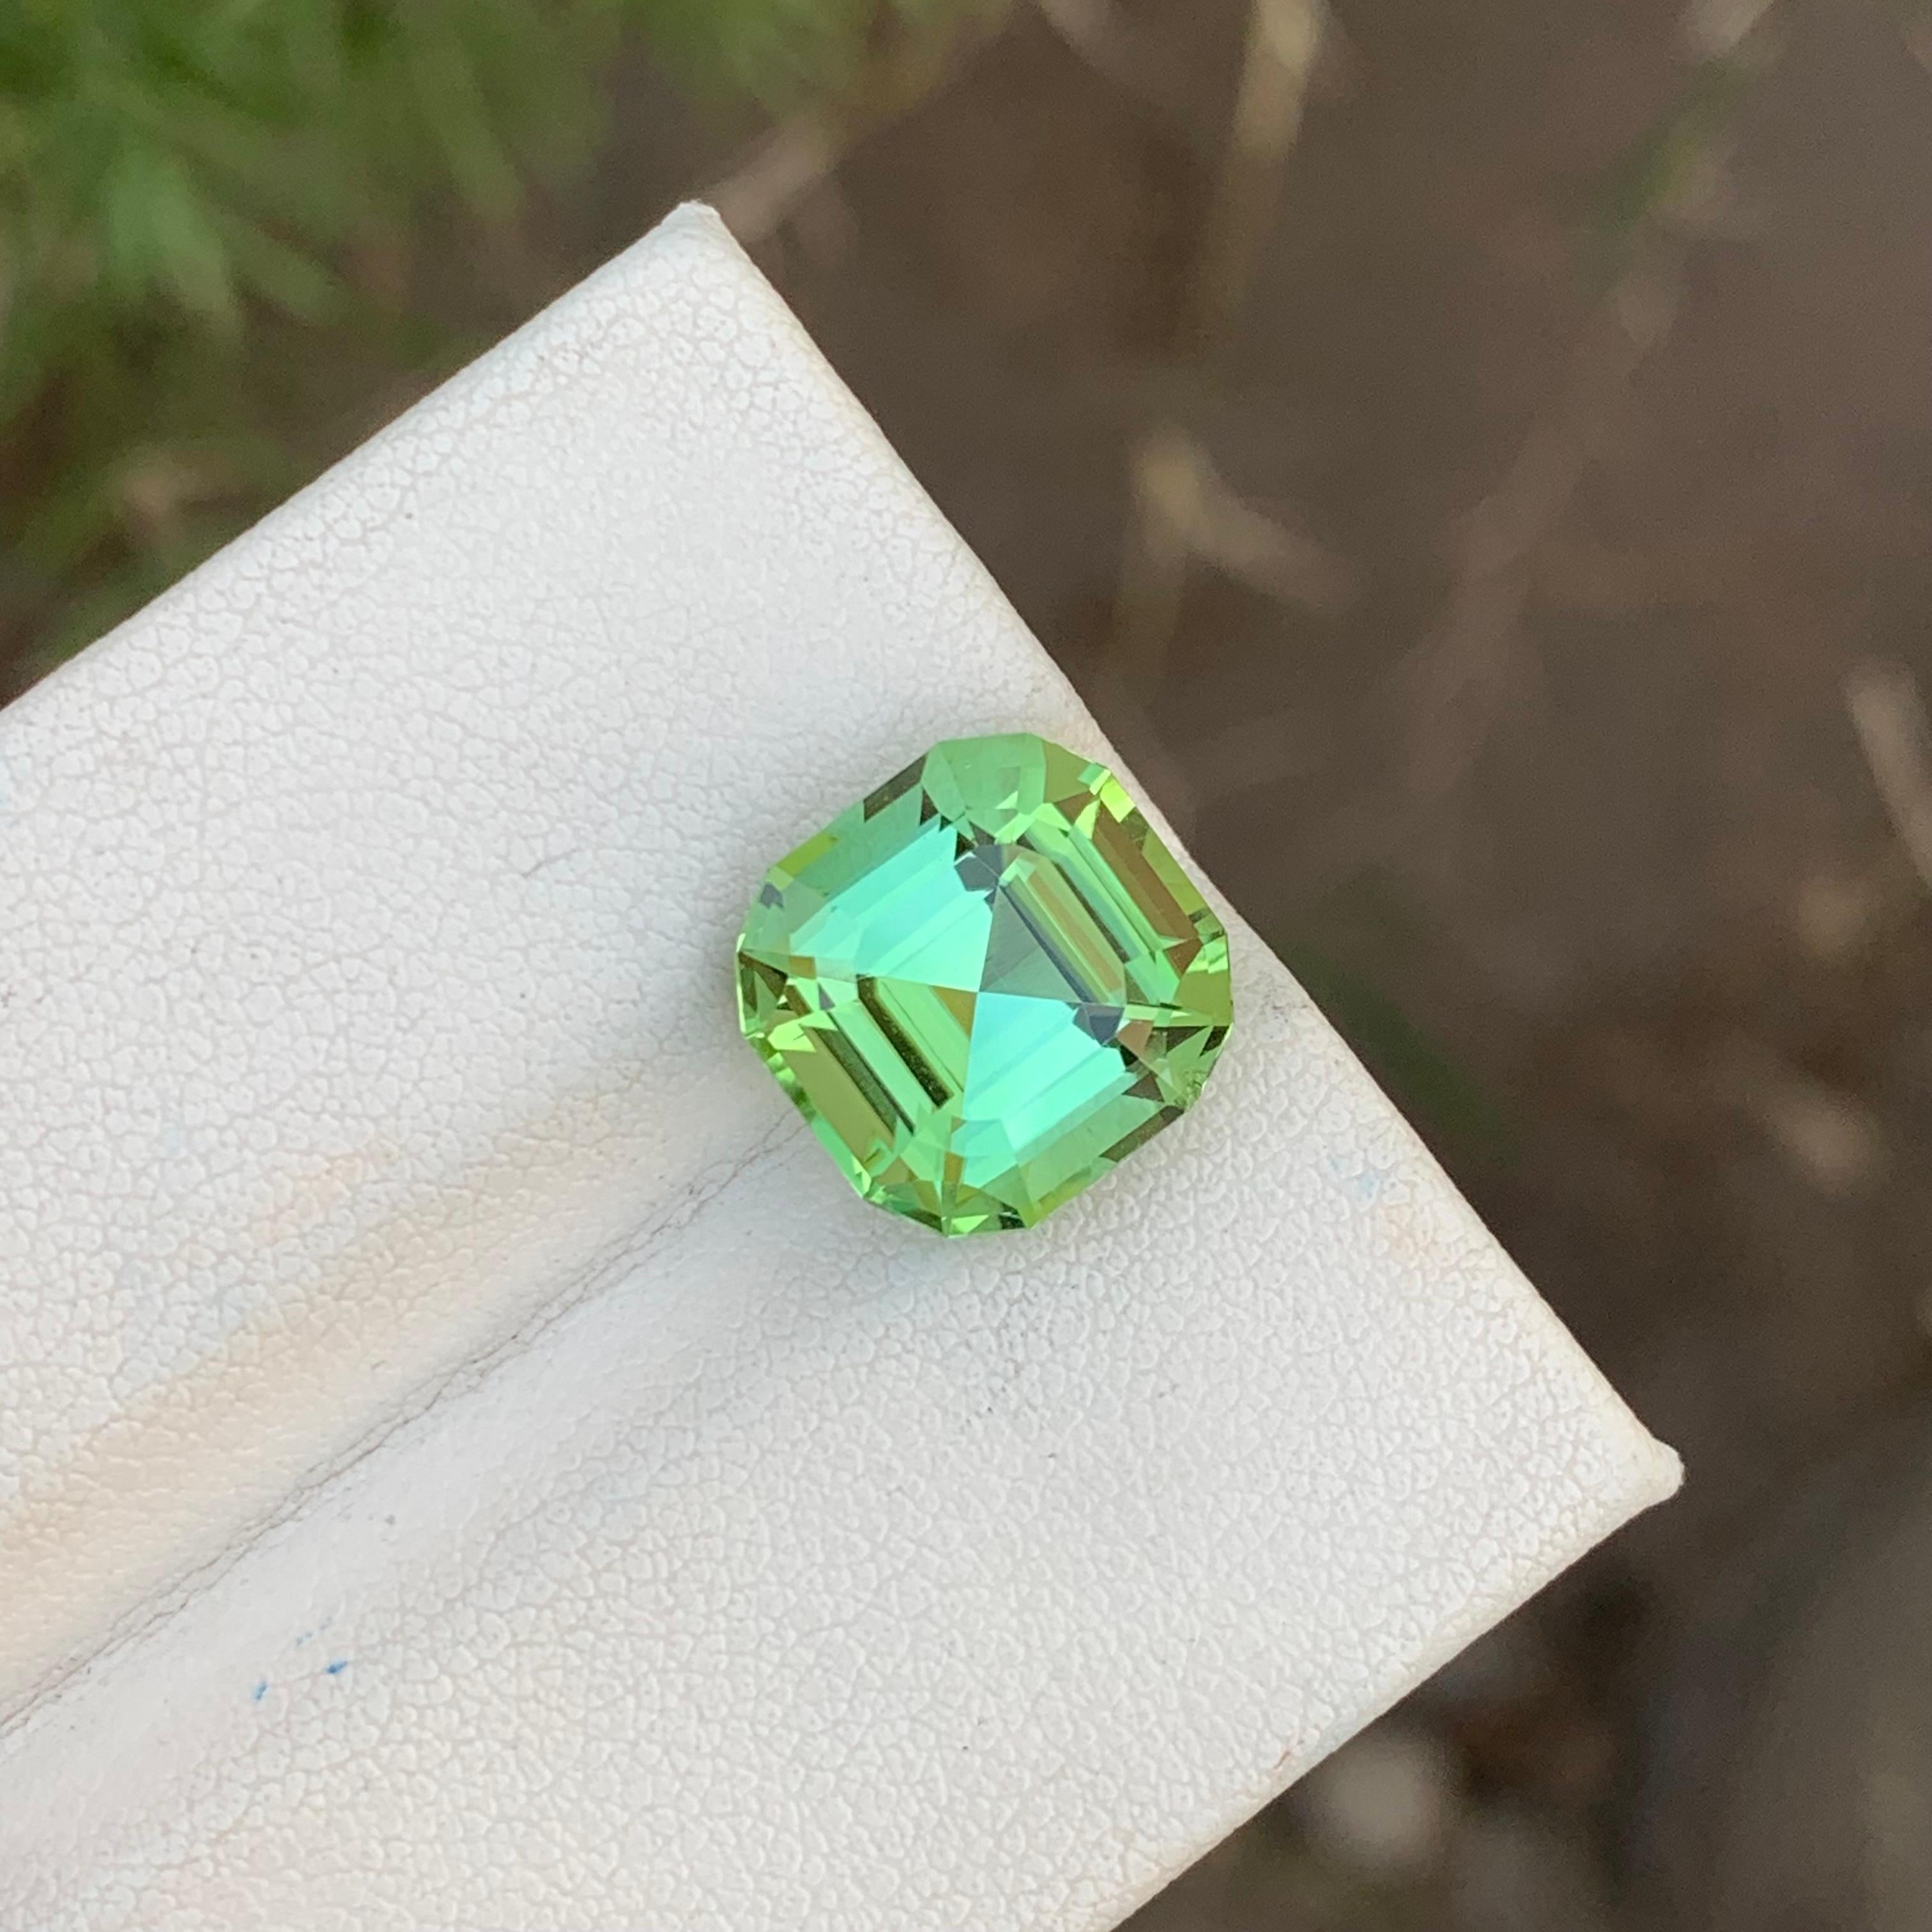 Loose Tourmaline 
Weight: 6.75 Carats 
Dimension: 11.4x11.1x8 Mm
Origin: Kunar Afghanistan 
Shape: Square Oval Angle
Cut: Asscher 
Certificate: On Customer Demand
Treatment: Non
Green Tourmaline, with its enchanting lagoon shade, stands as a